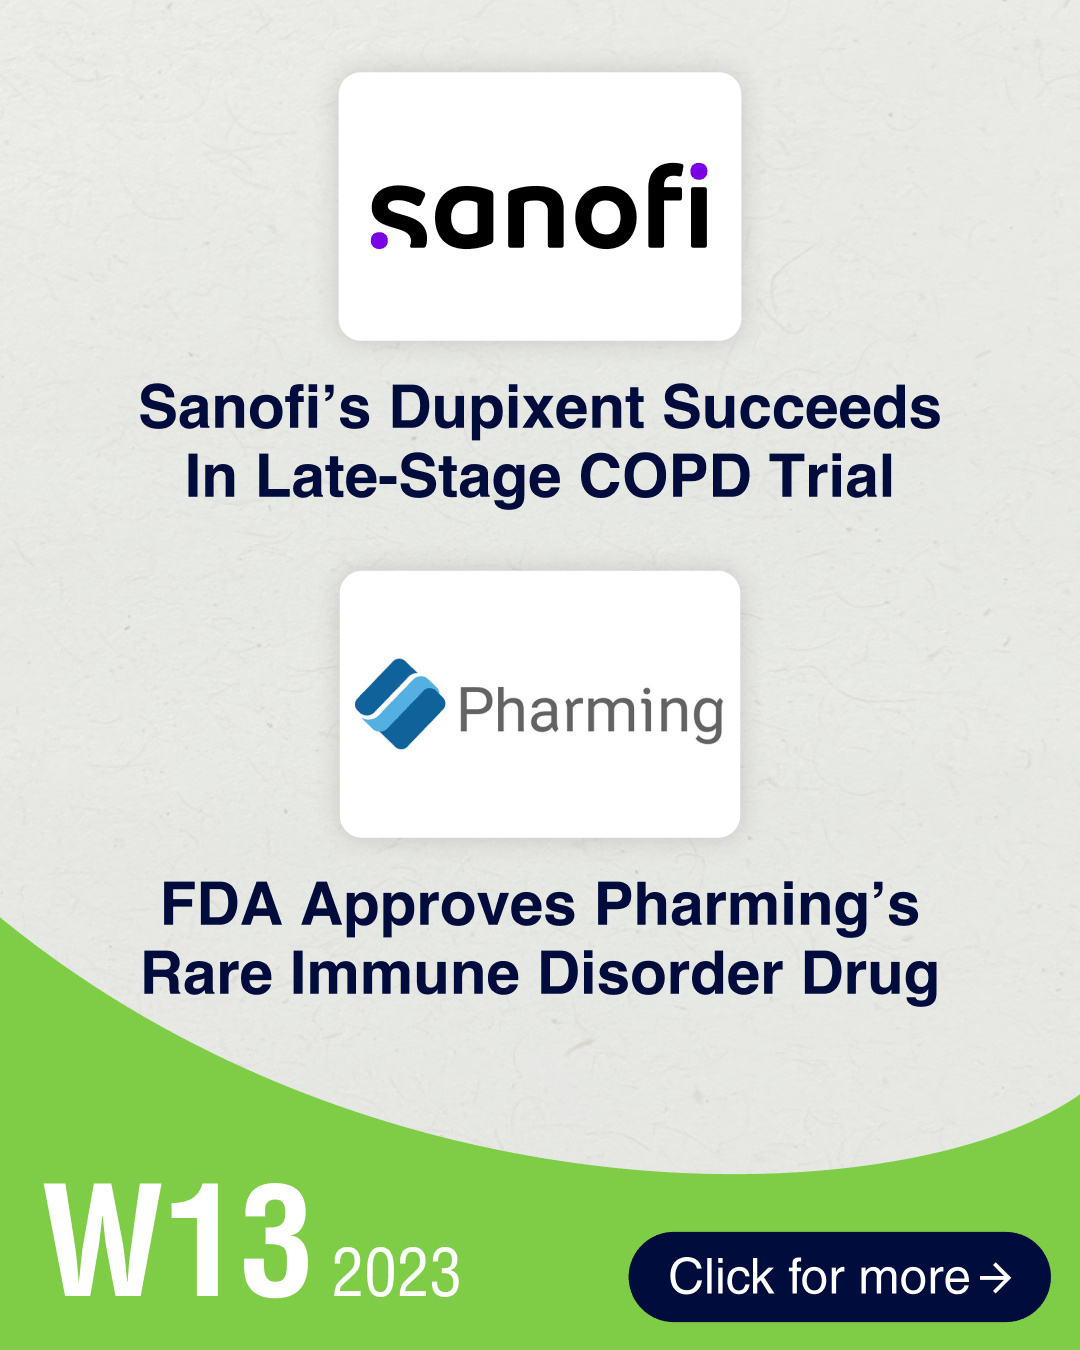 Sanofi’s Dupixent succeeds in COPD trial; India cancels licenses of 18 drugmakers